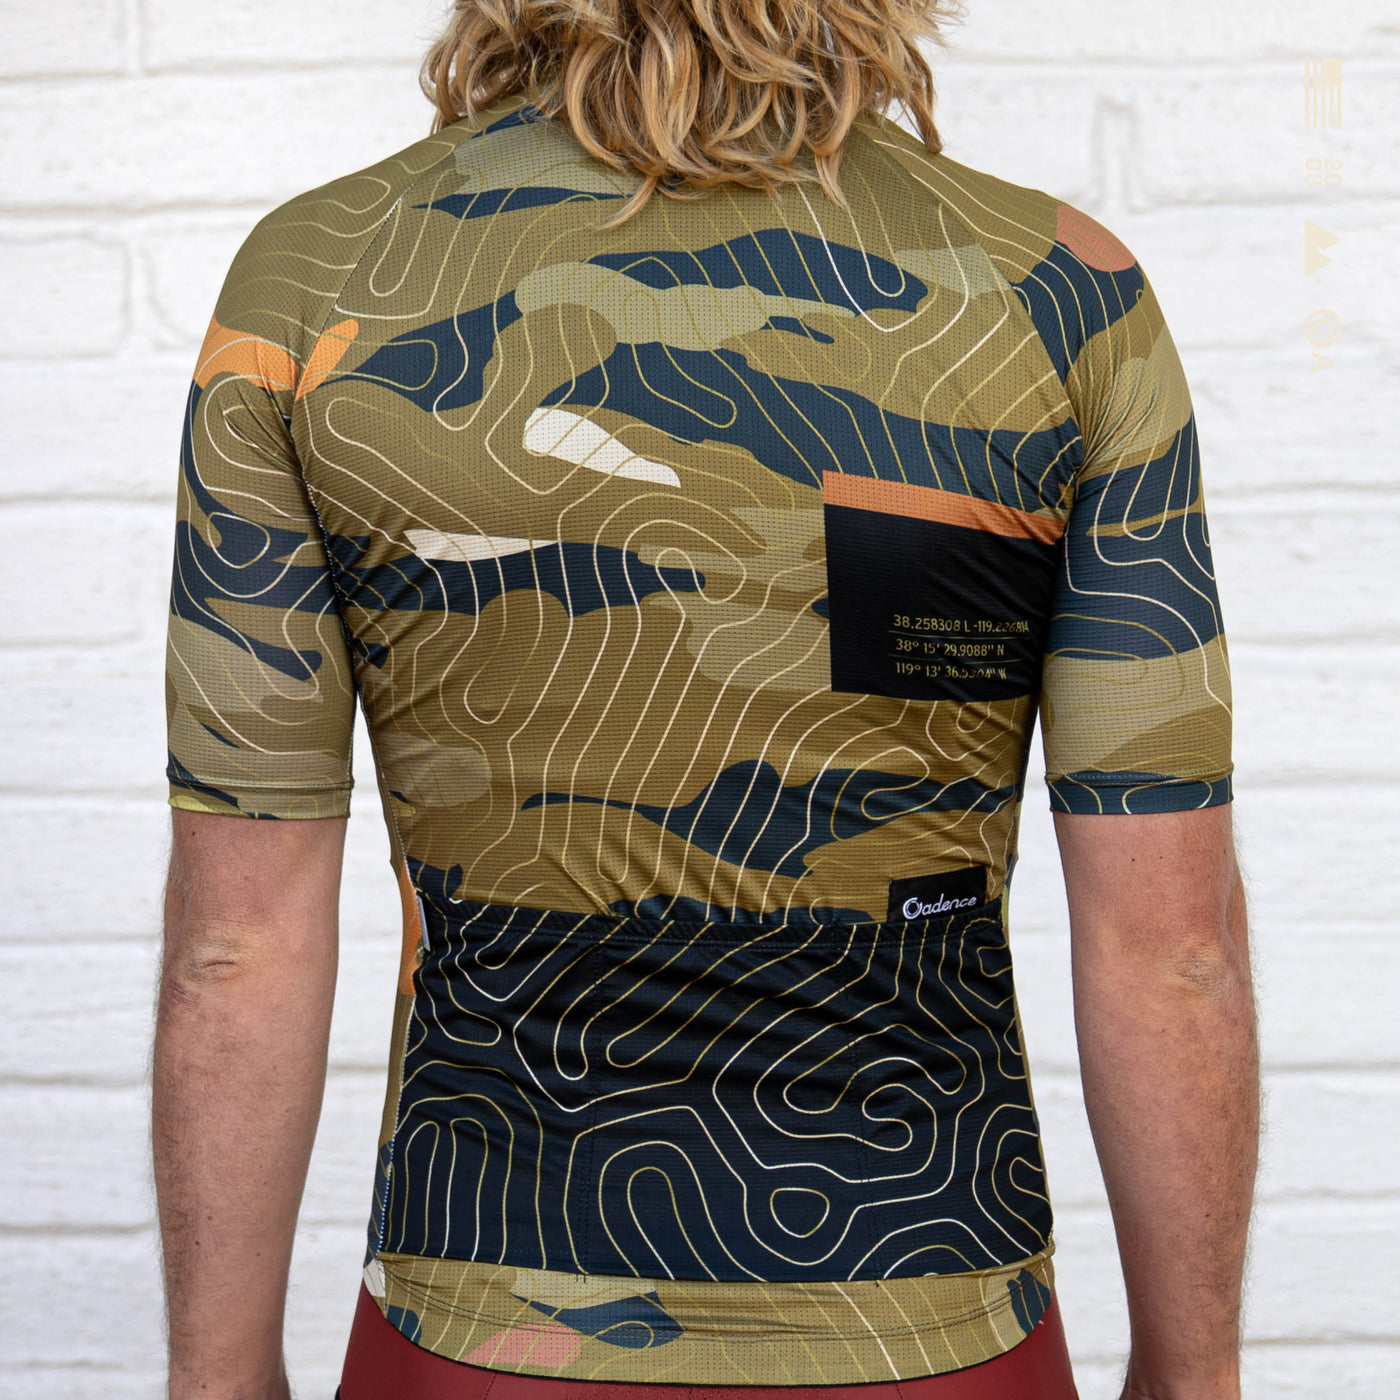 Lakeview Jersey [Camo]